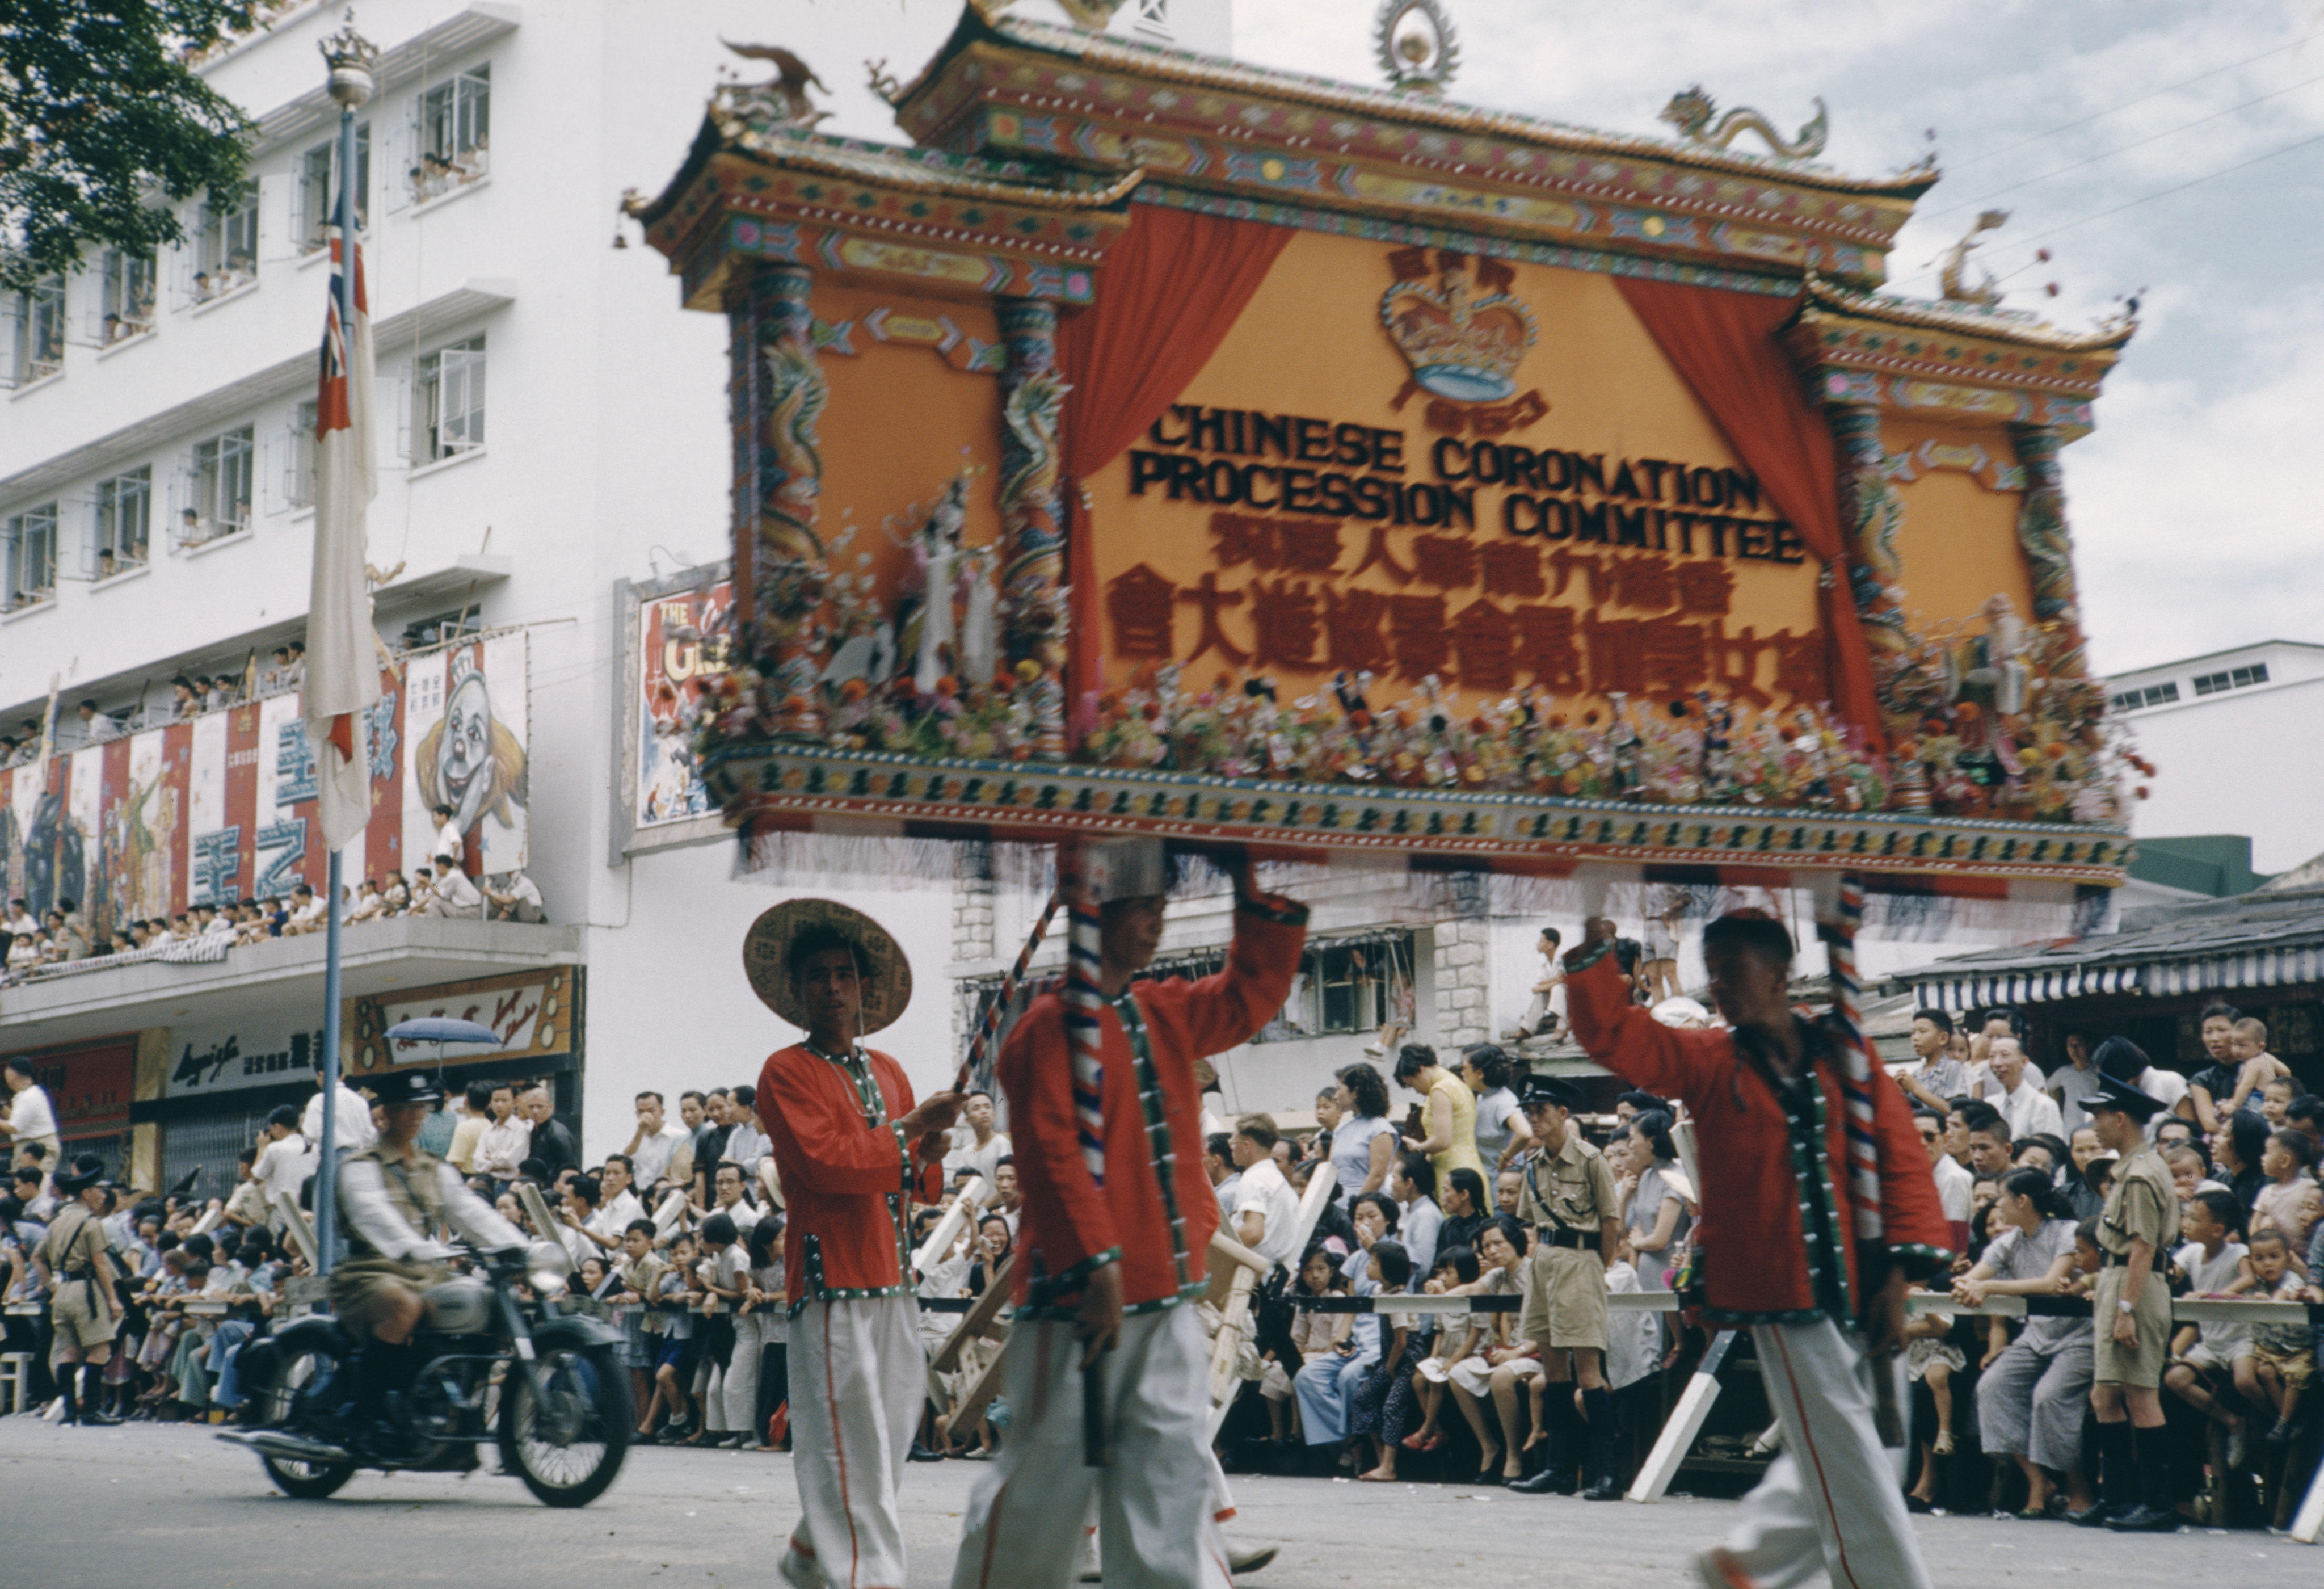 A procession in Hong Kong to celebrate the coronation of Queen Elizabeth in June 1953. The Chinese Coronation Procession Committee march by with a large sign. Photo: Getty Images